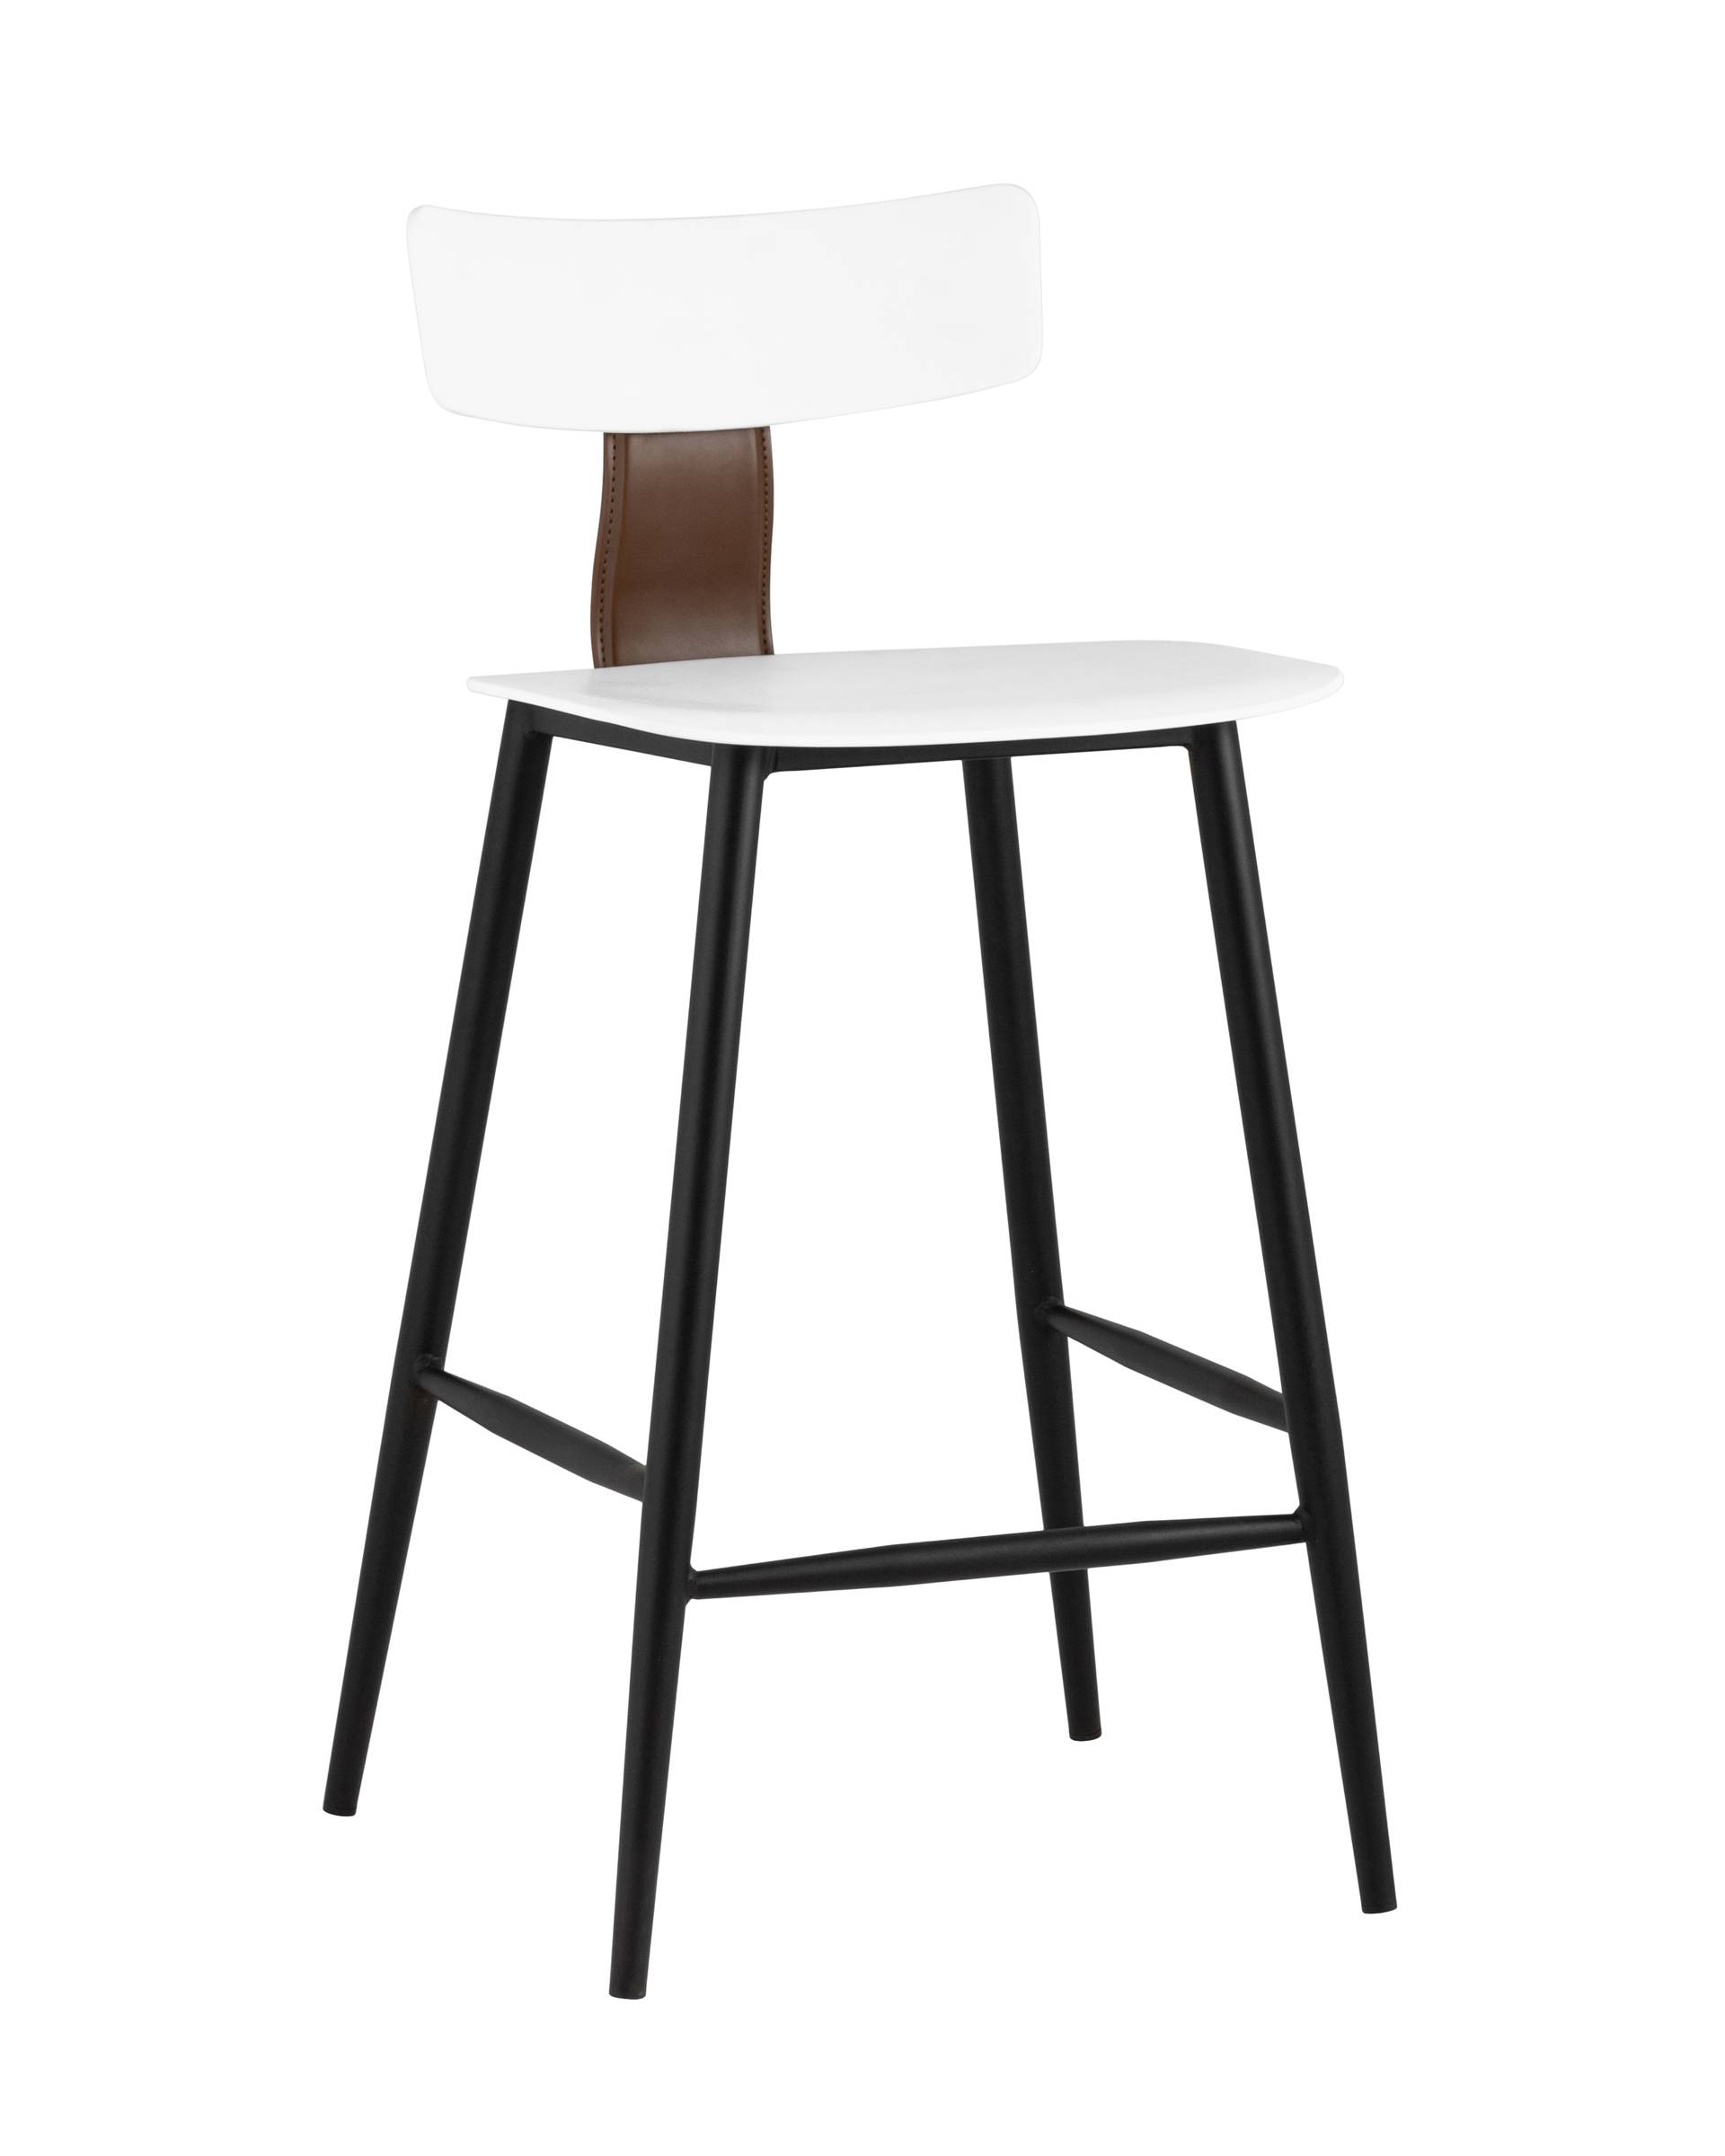   Stool Group Ant 000025449